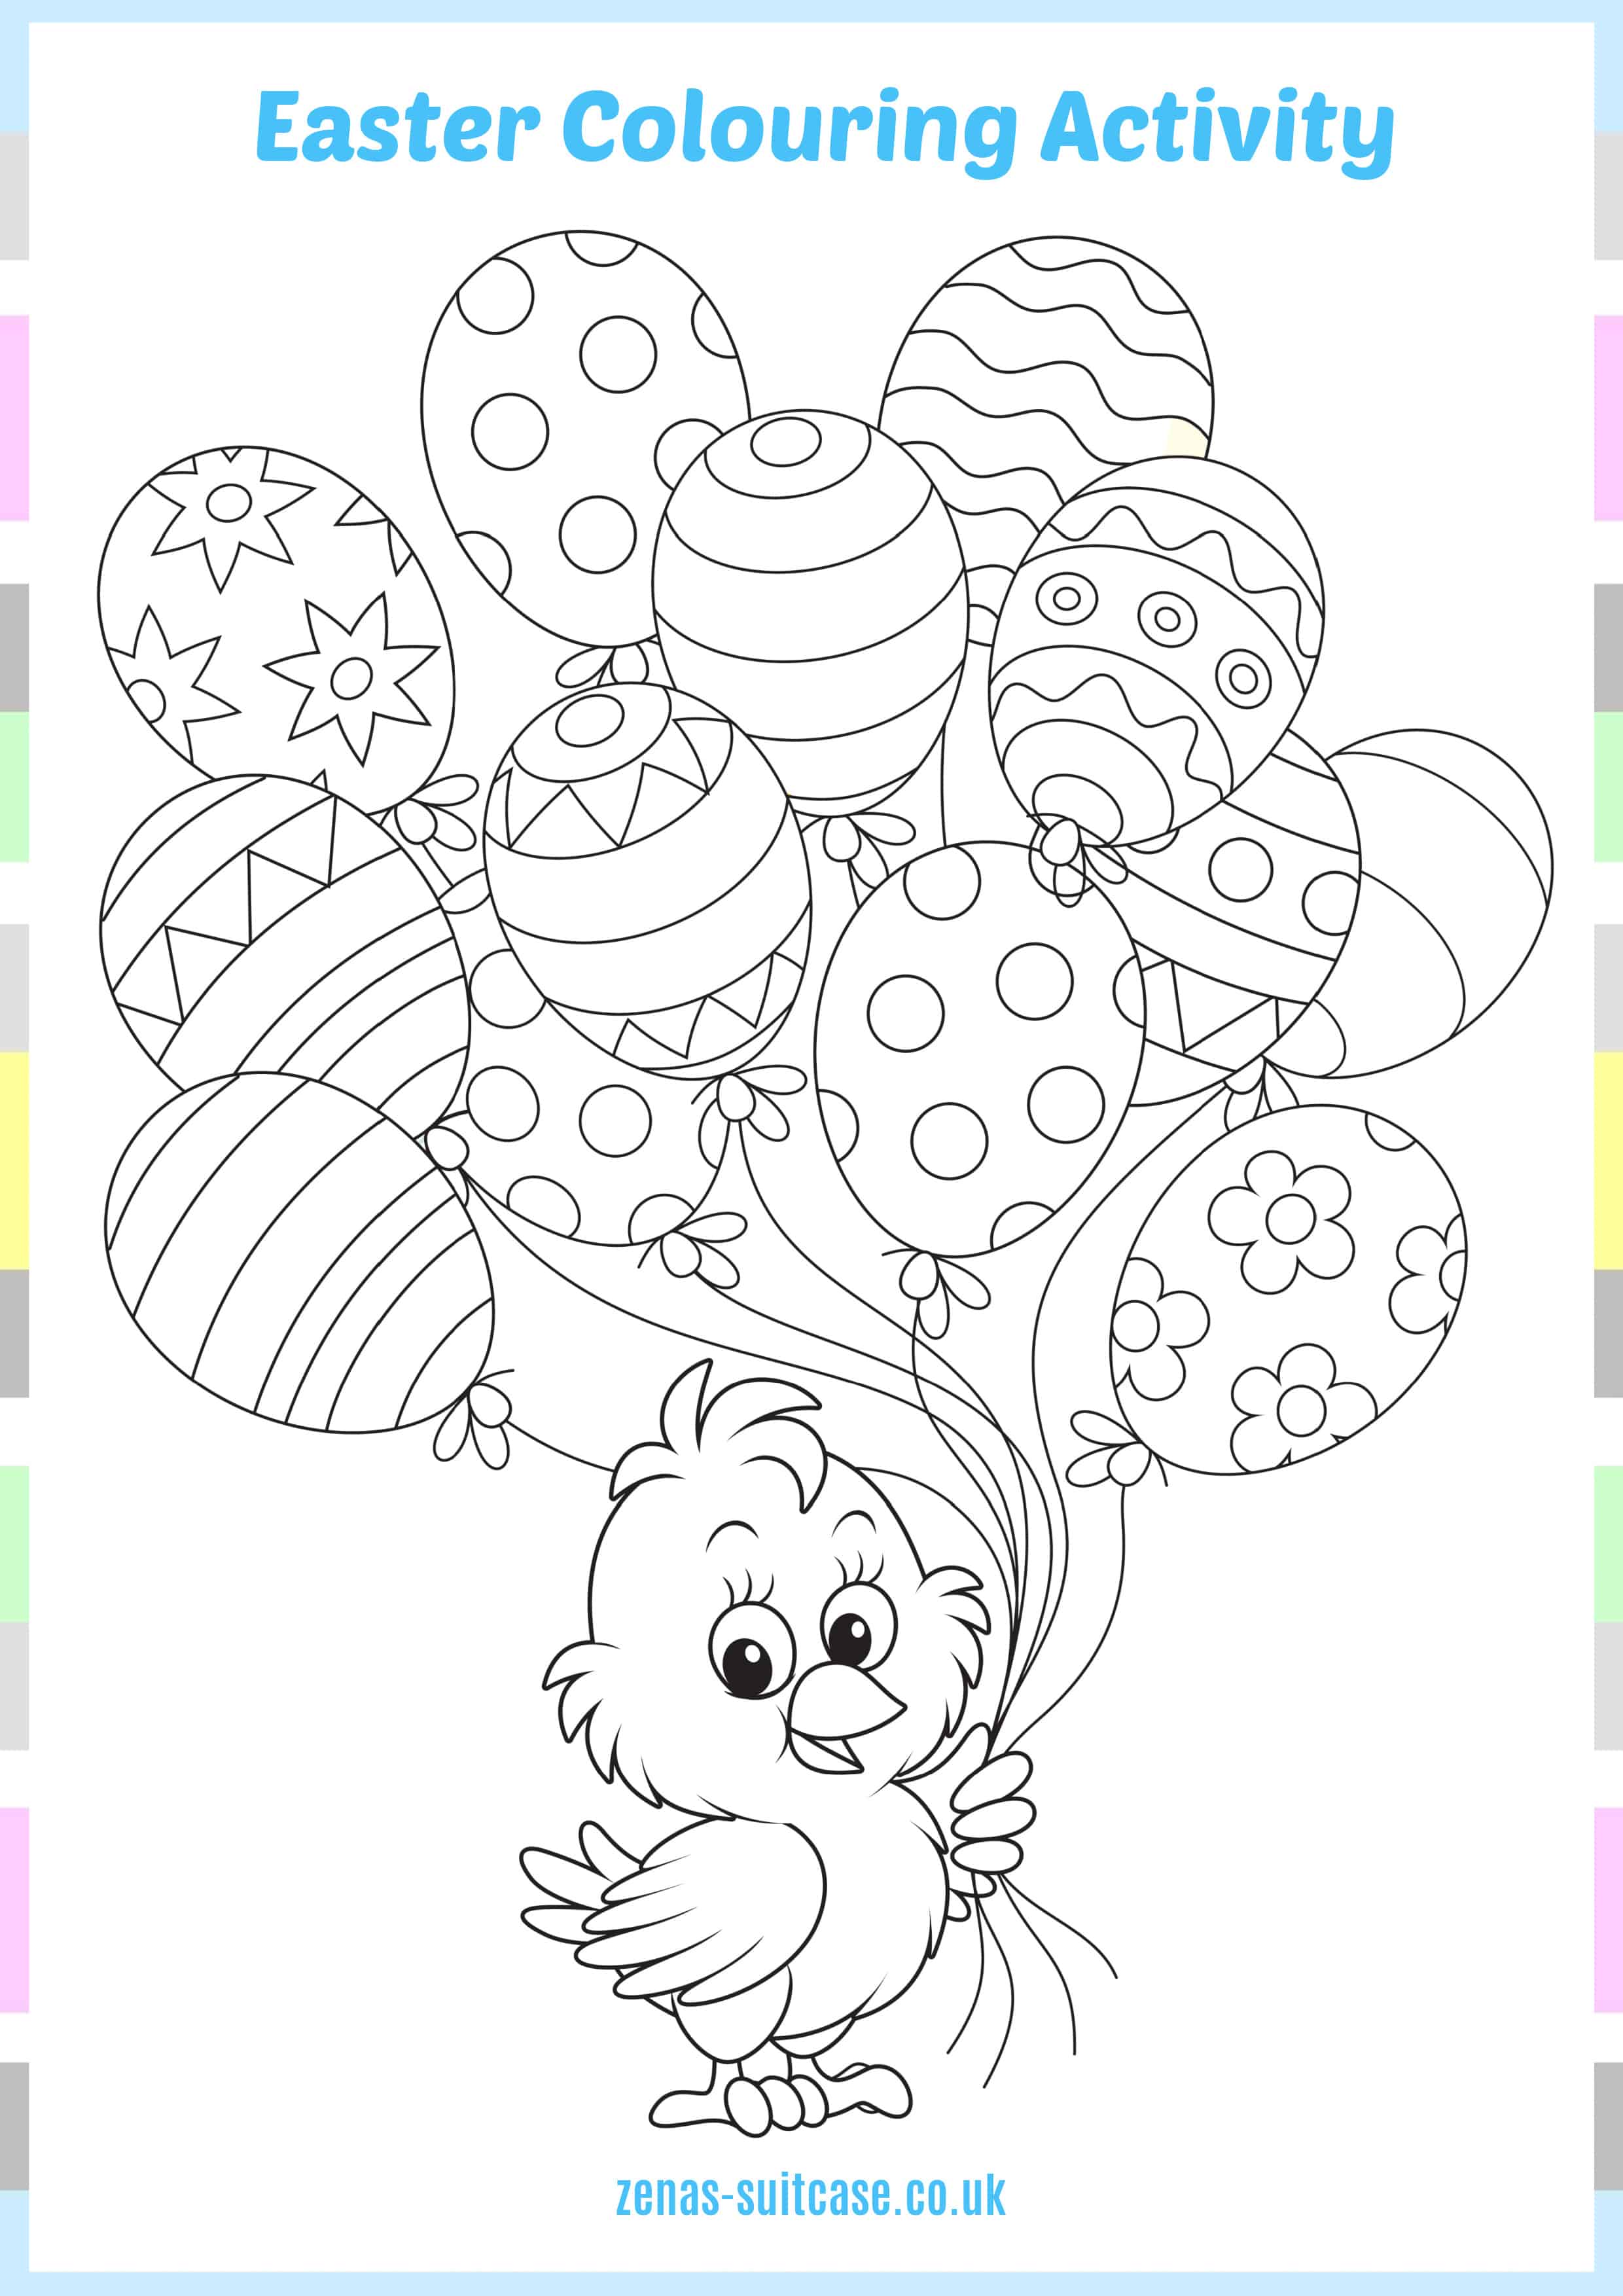 Kids Easter Egg Colouring Activity Page